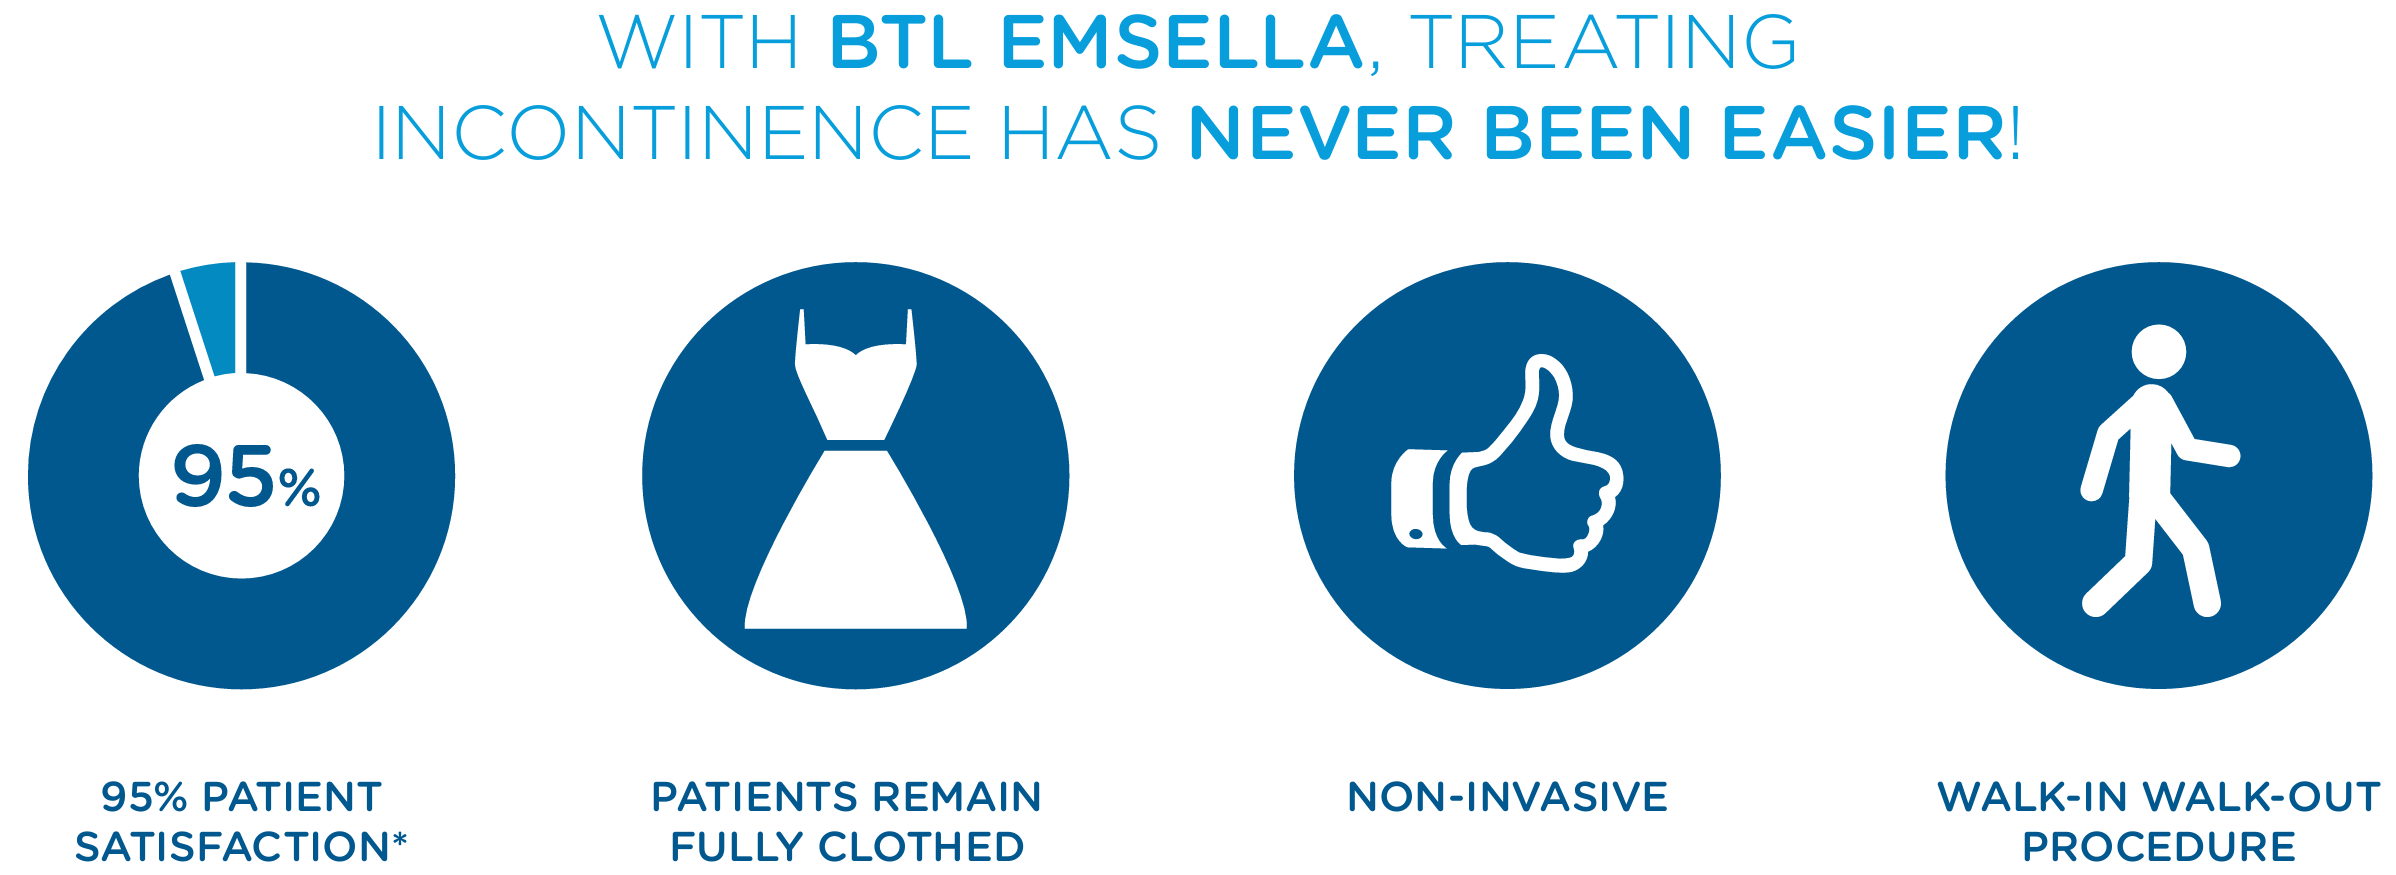 With BTL EMSELLA, treating incontinence has never been easier!